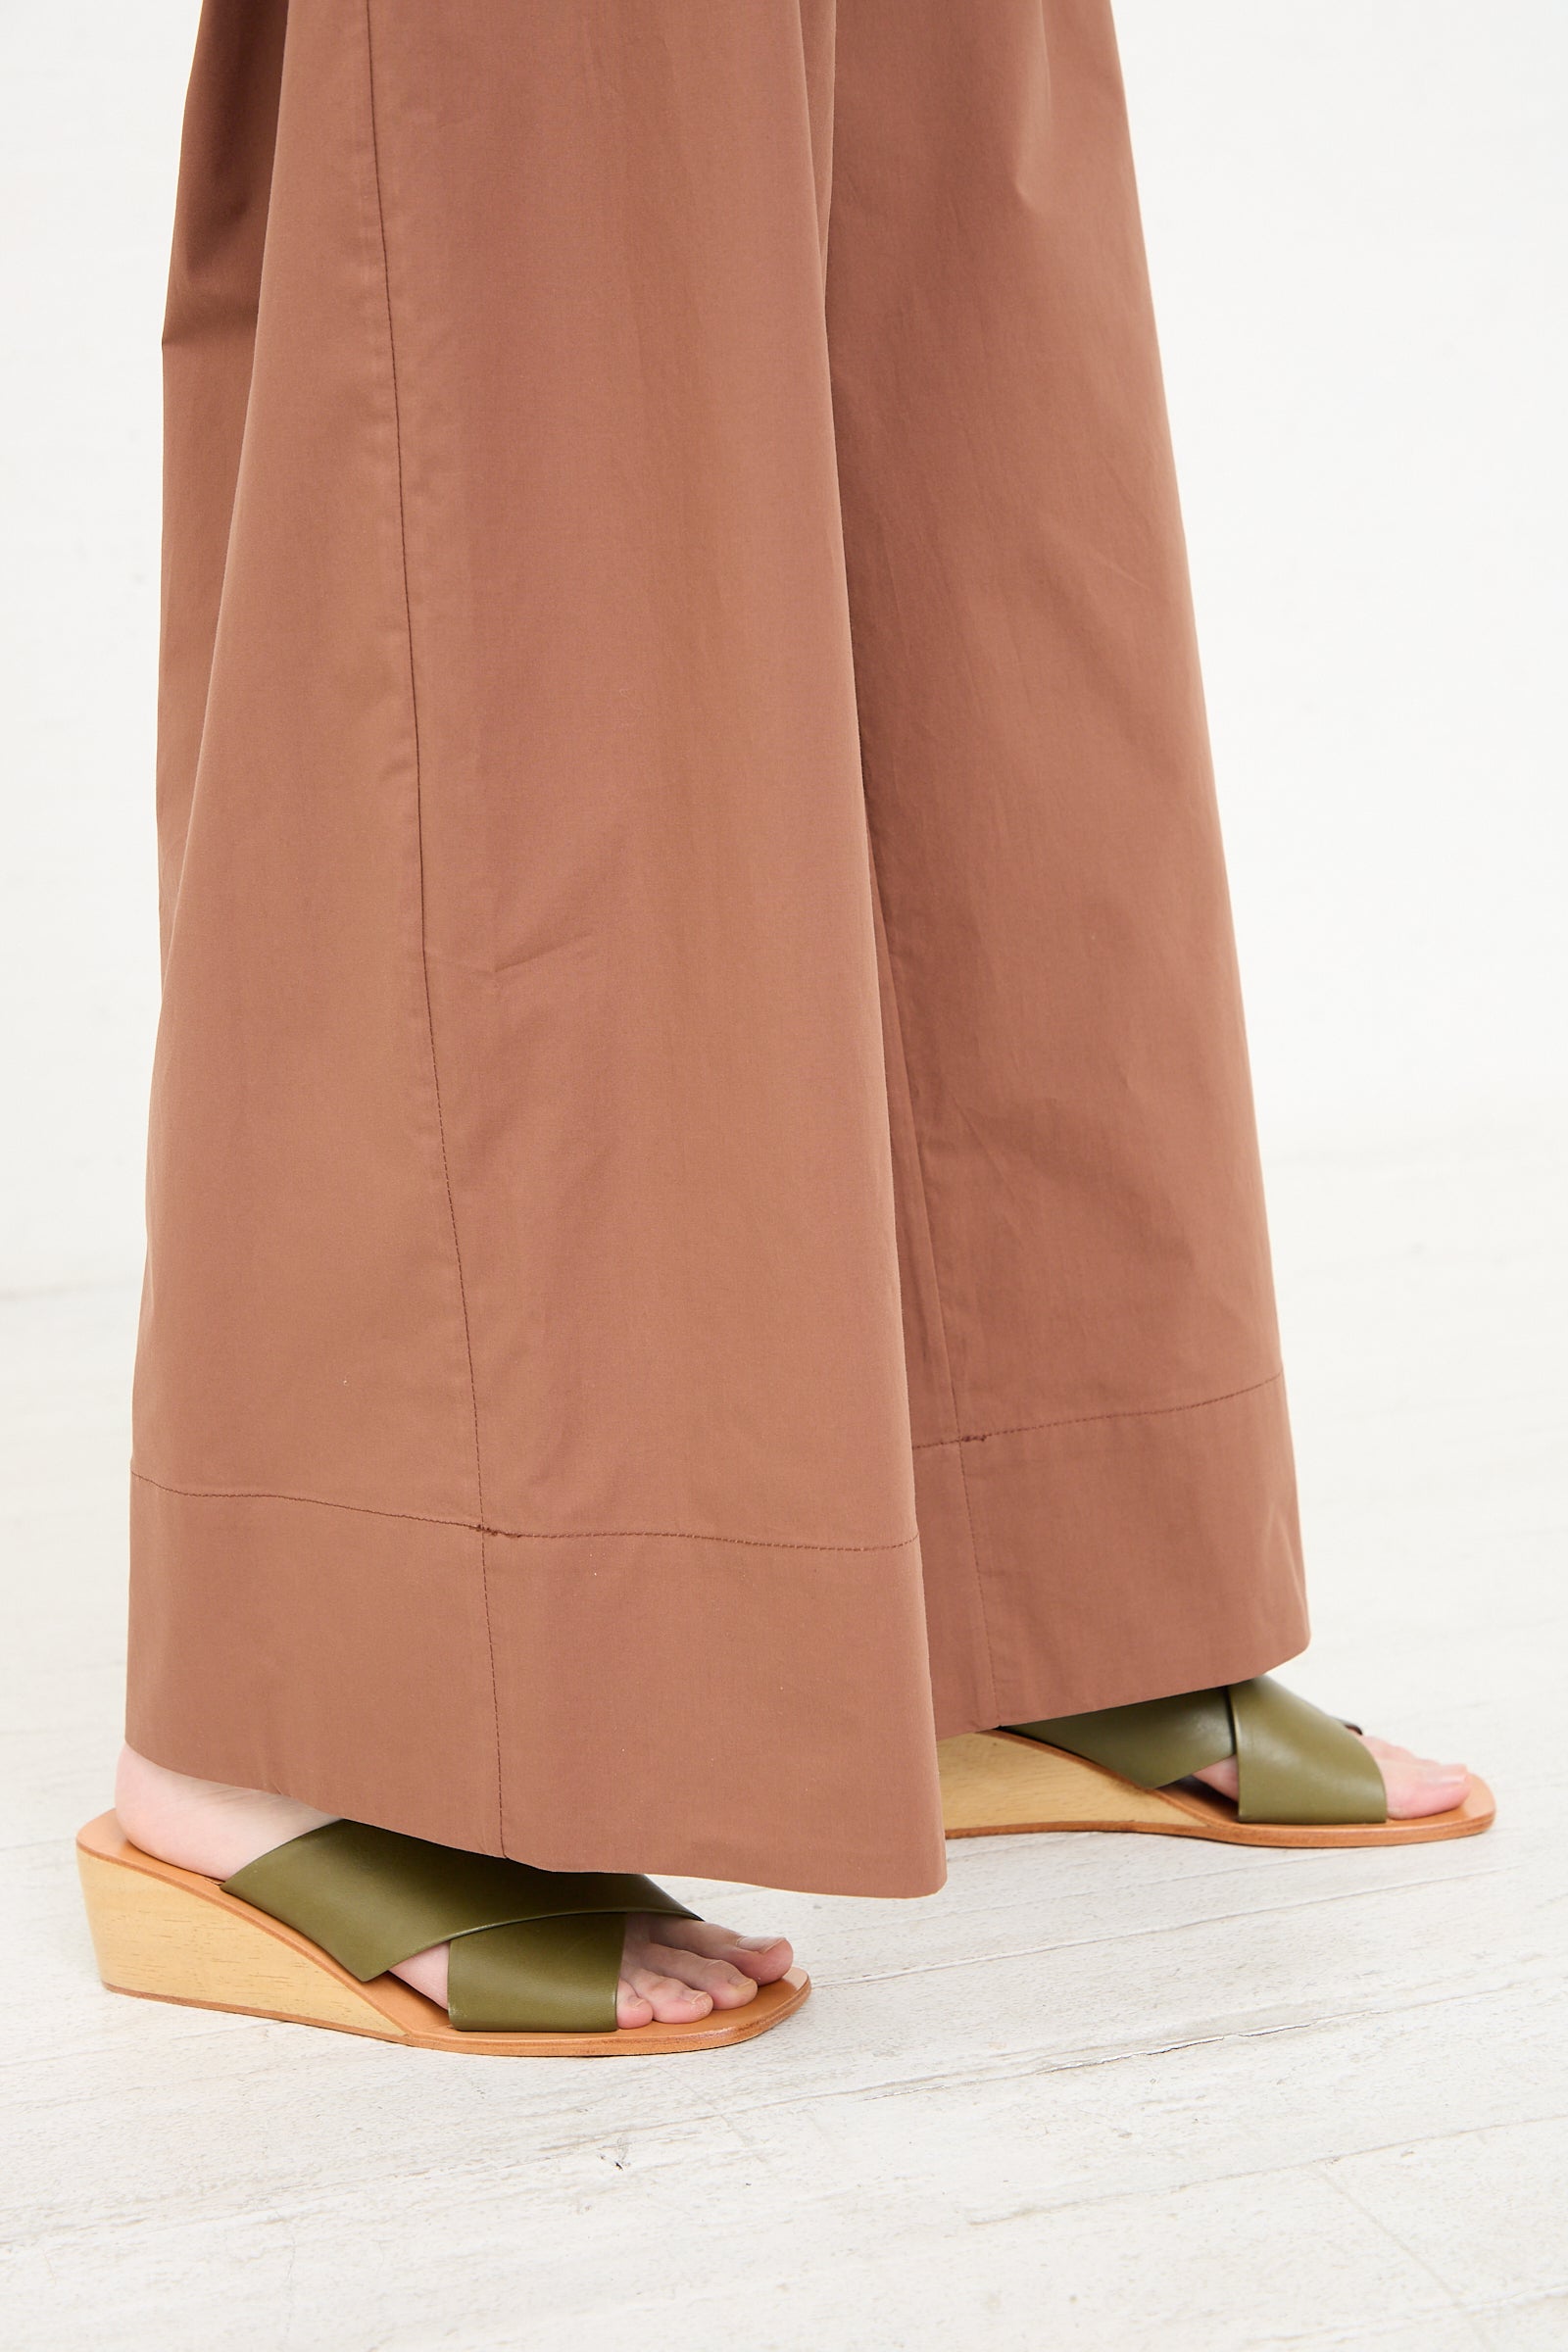 A person wearing the Rachel Comey Coxsone Pant in Sienna and green open-toed sandals with wooden heels.